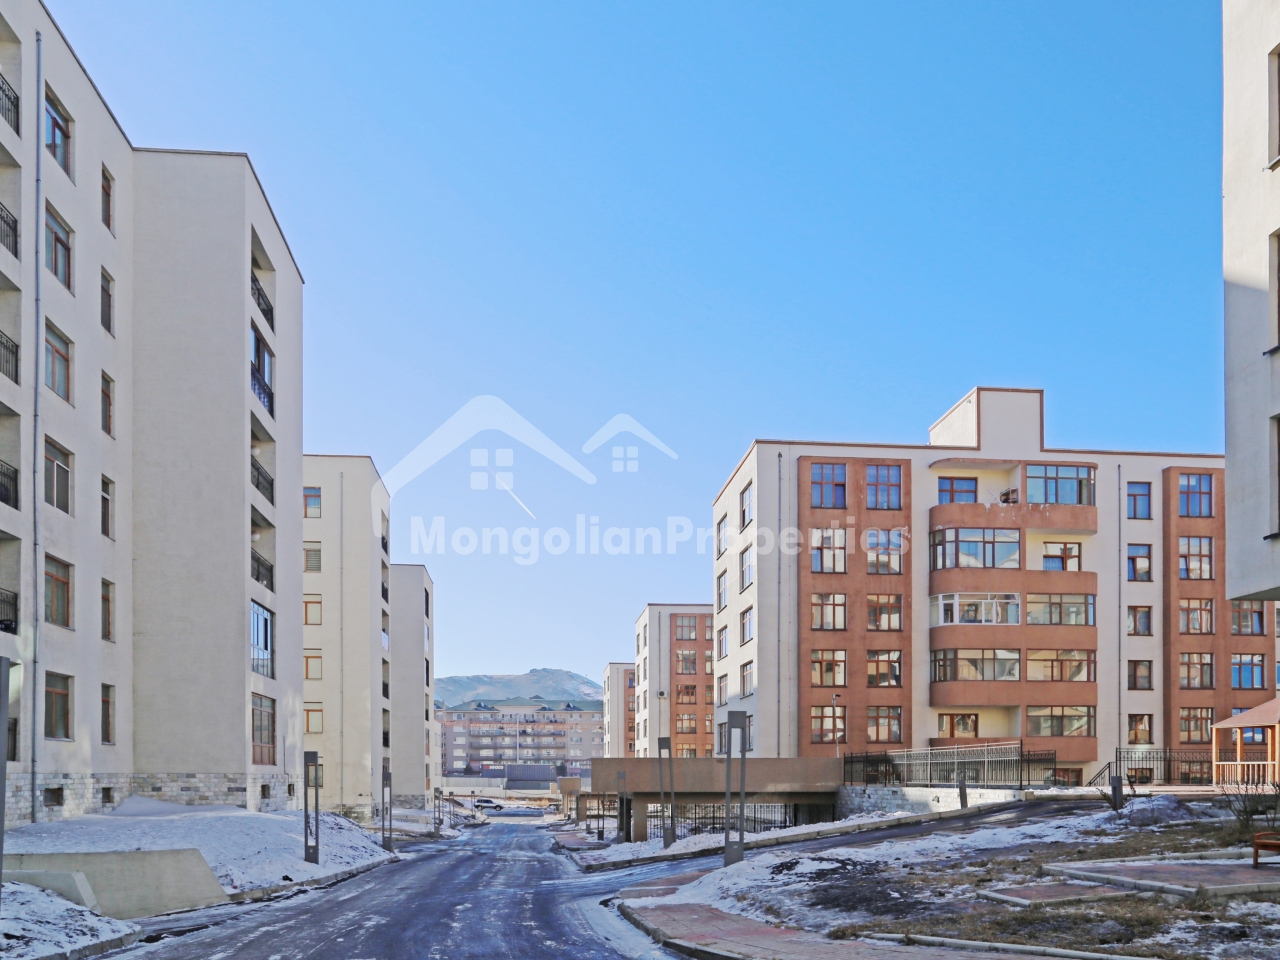 FOR SALE: Blue Sky Town in Zaisan (next to ASU), 132m2, 3bed, 2bath on the 2nd floor. Investment rental yield: 12%